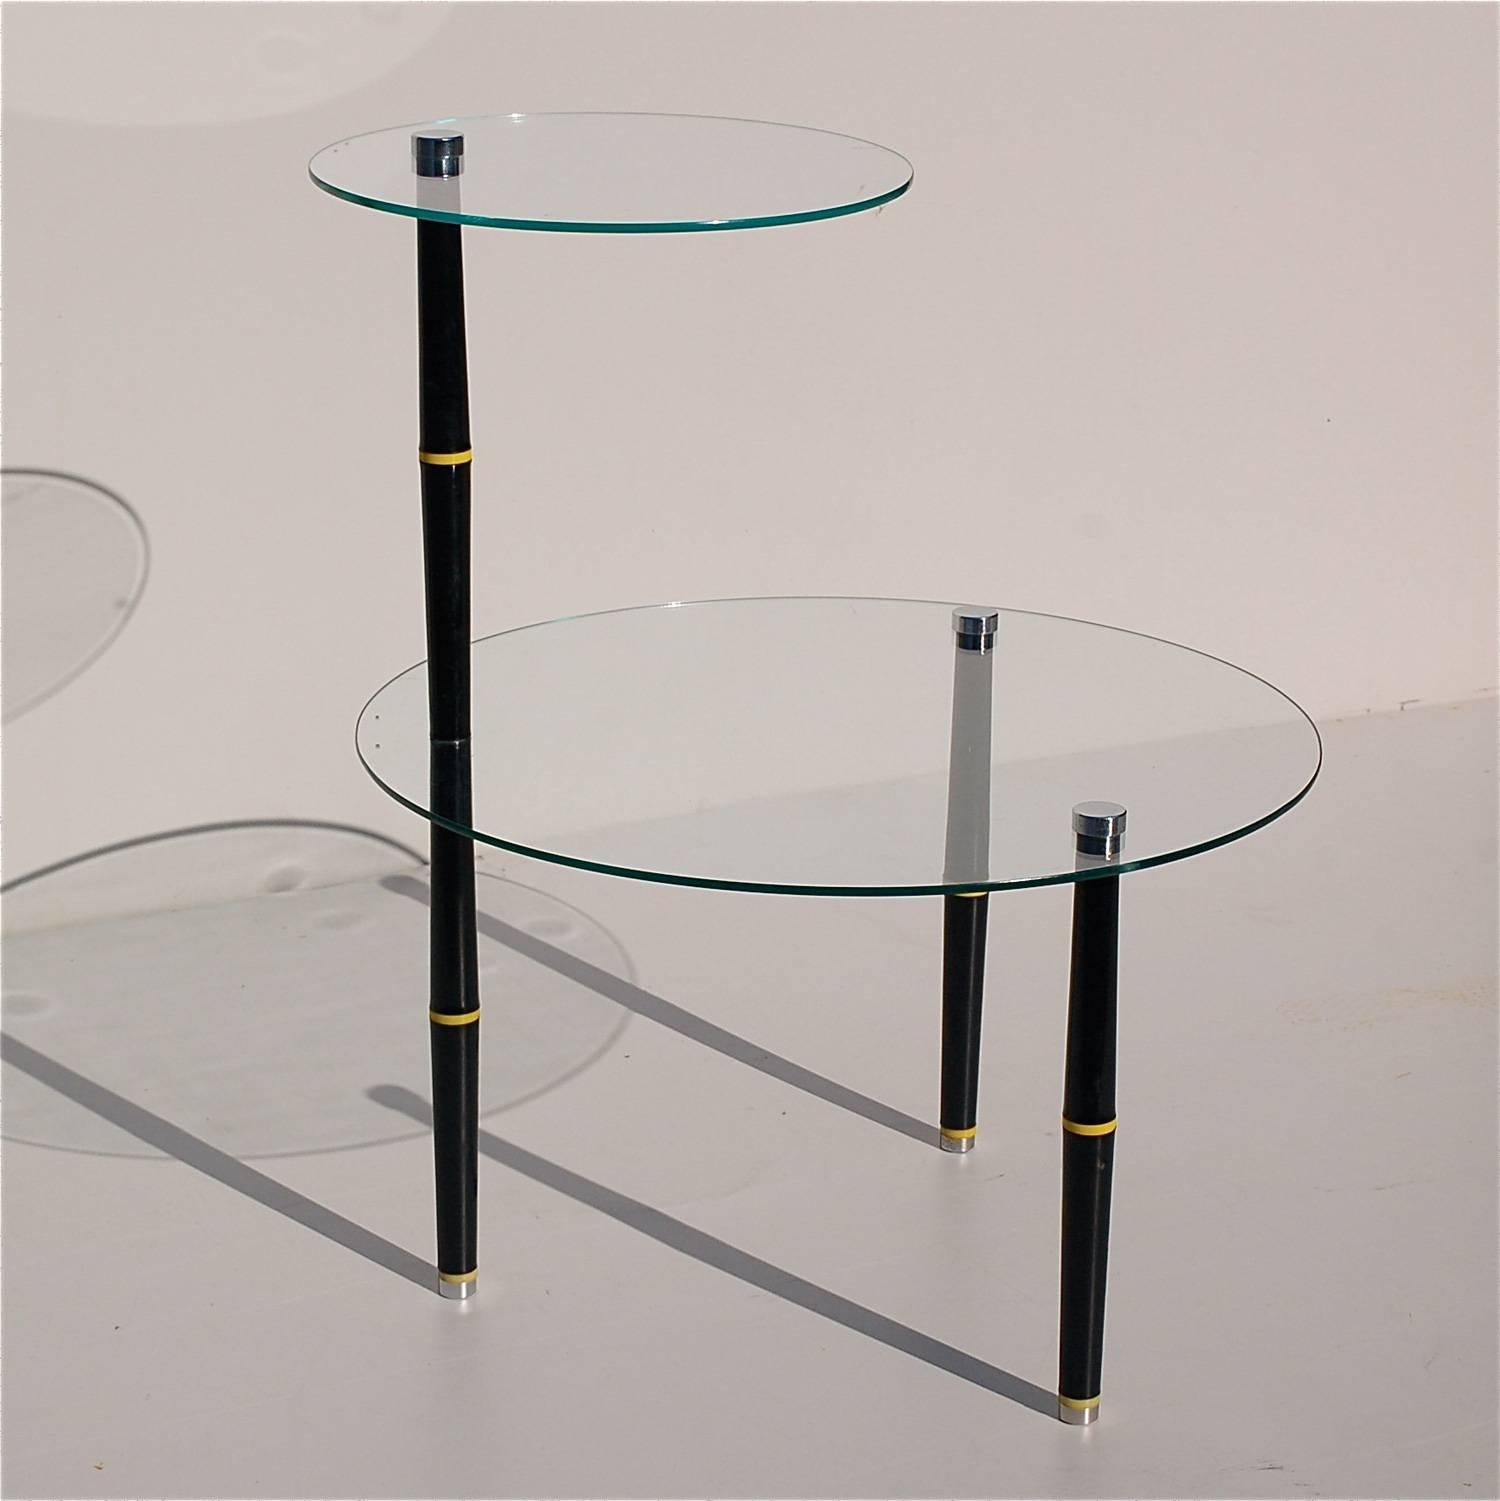 This vintage shop window display table has a dual purpose as a two-tiered, colorful side table. Please check the Profound Objects shopfront for other available models and colors. Different configurations are possible by assembling individual glass